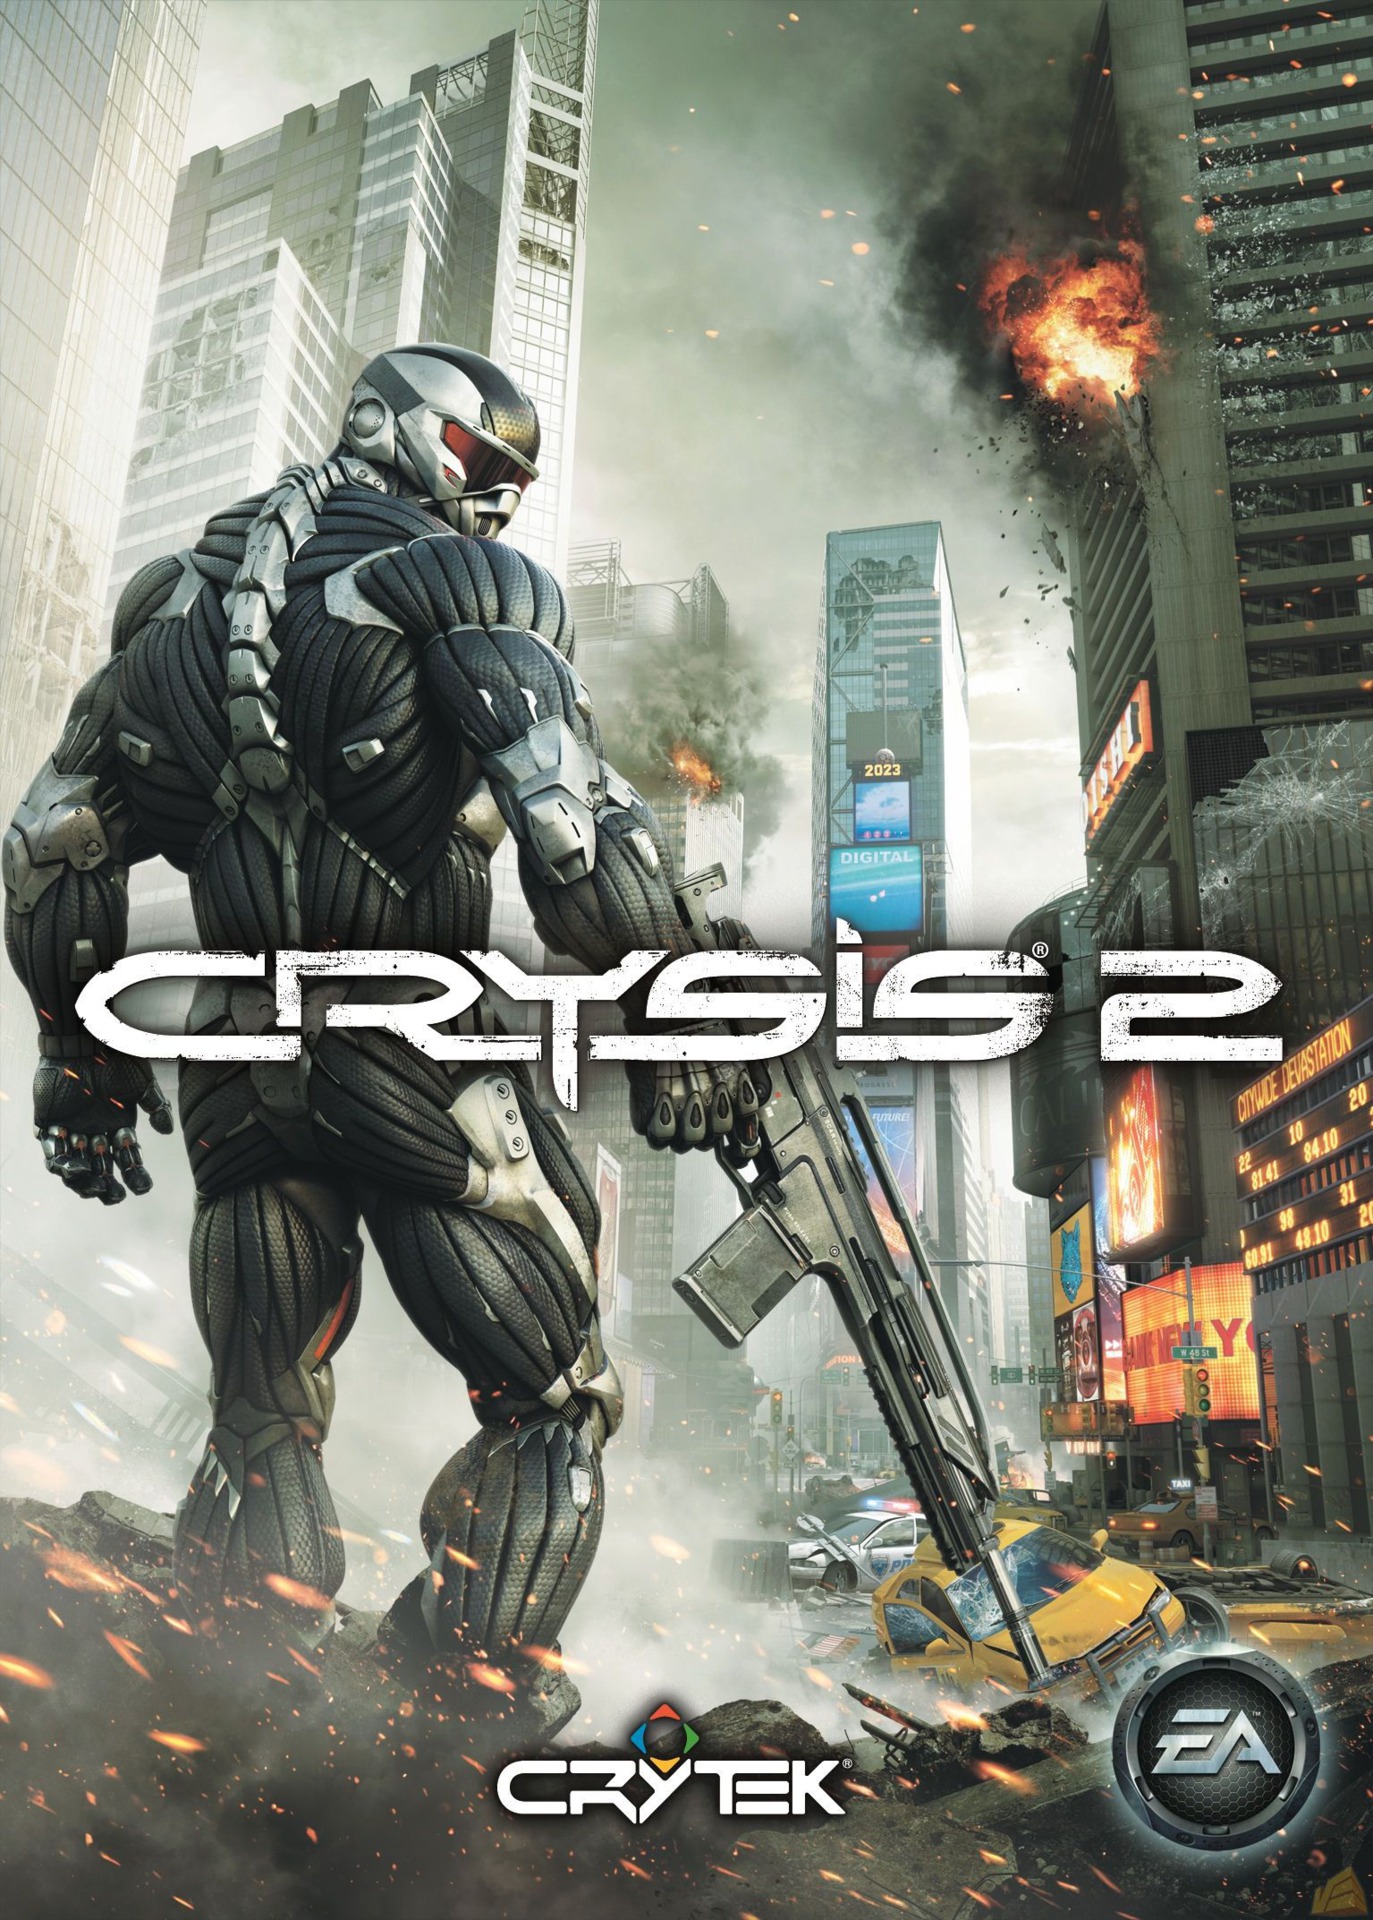 First Impressions - Crysis 2